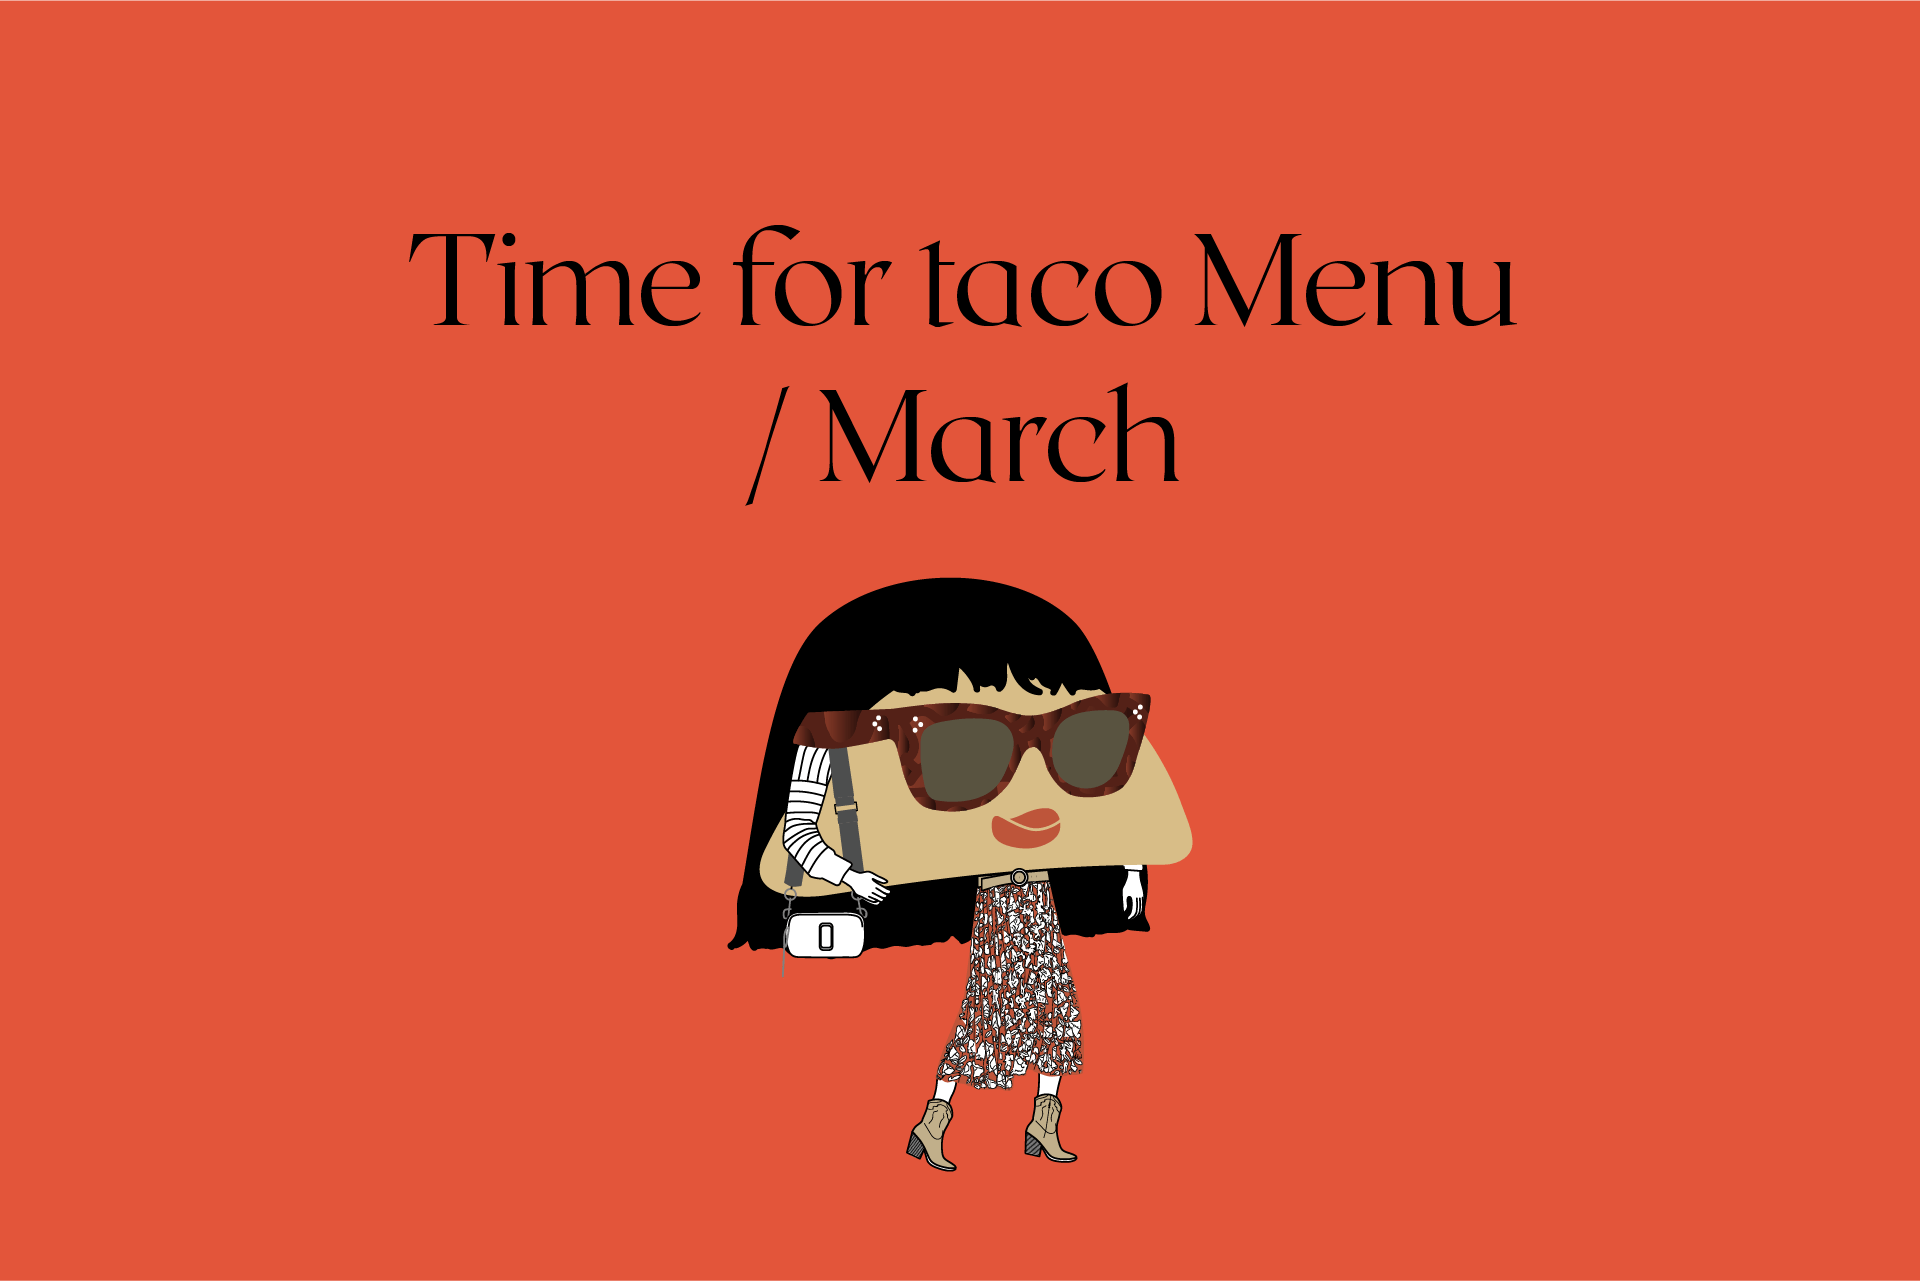 Time for taco Menu / March ’21